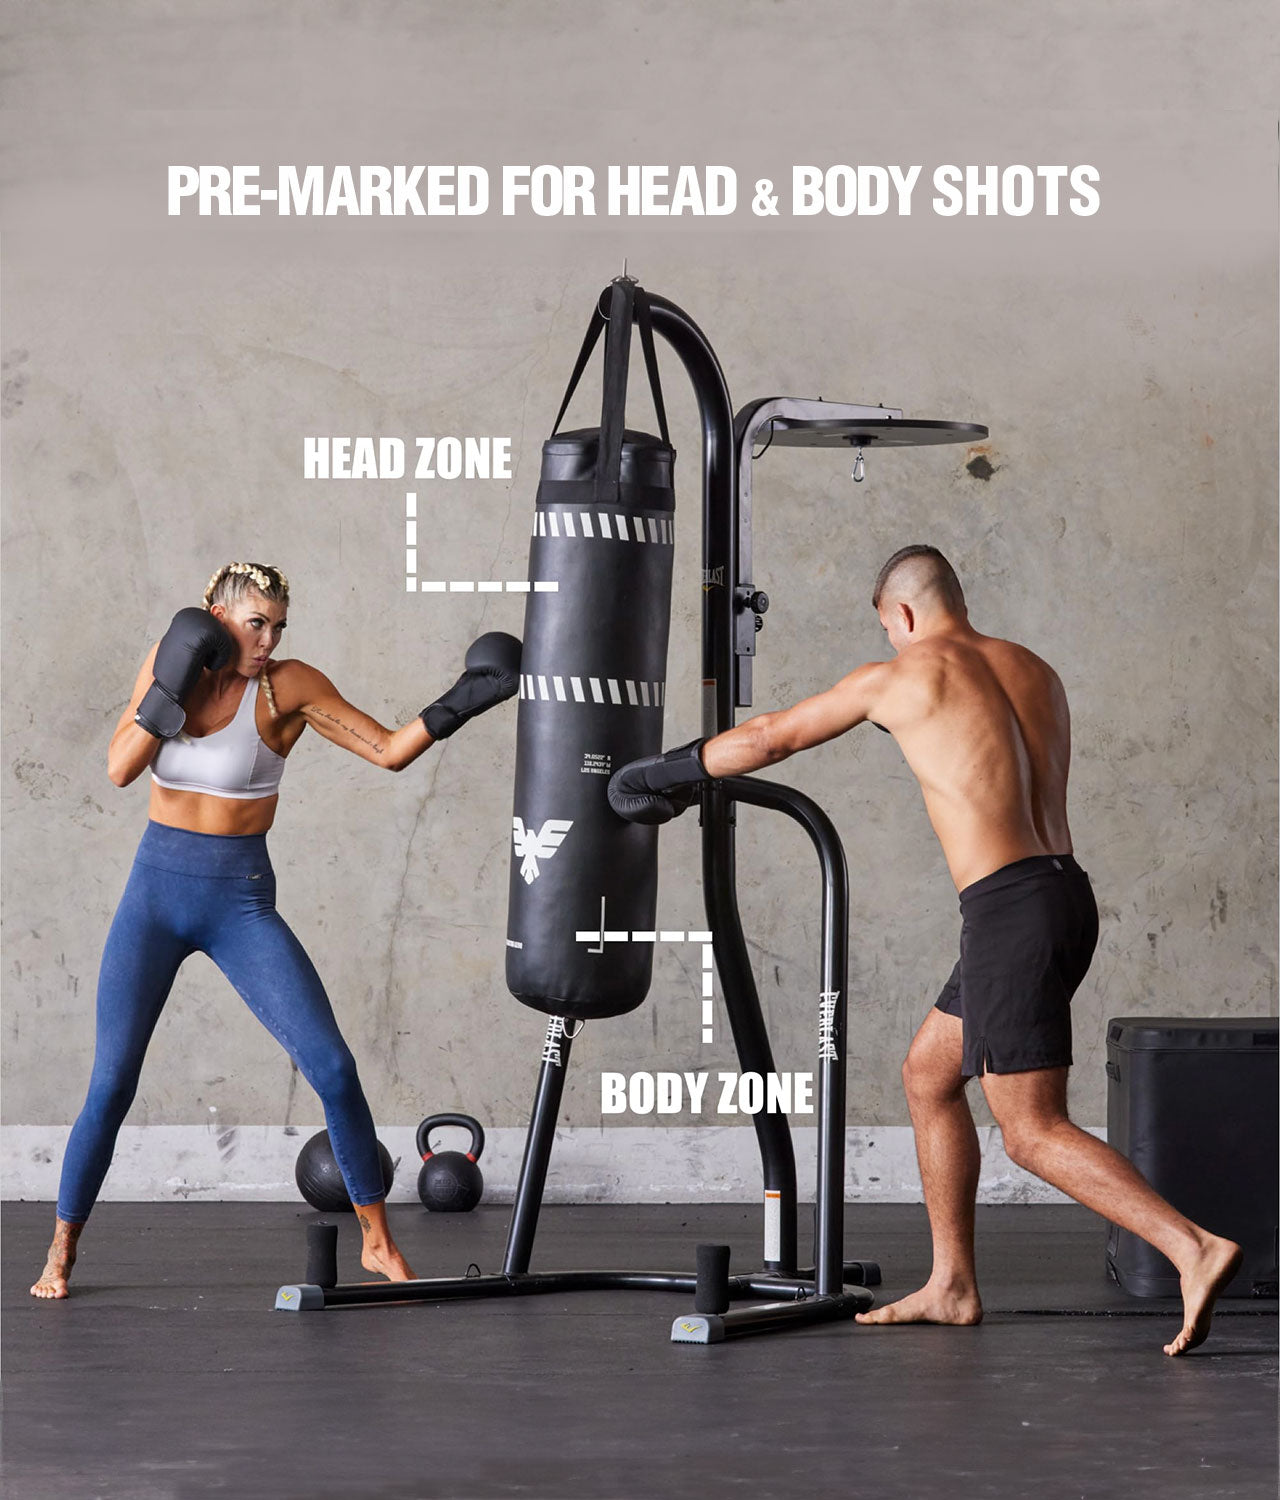 Elite Sports Adults 4 ft Essential Boxing Punching Bag Set Pre-Marked for Head & Body Shots